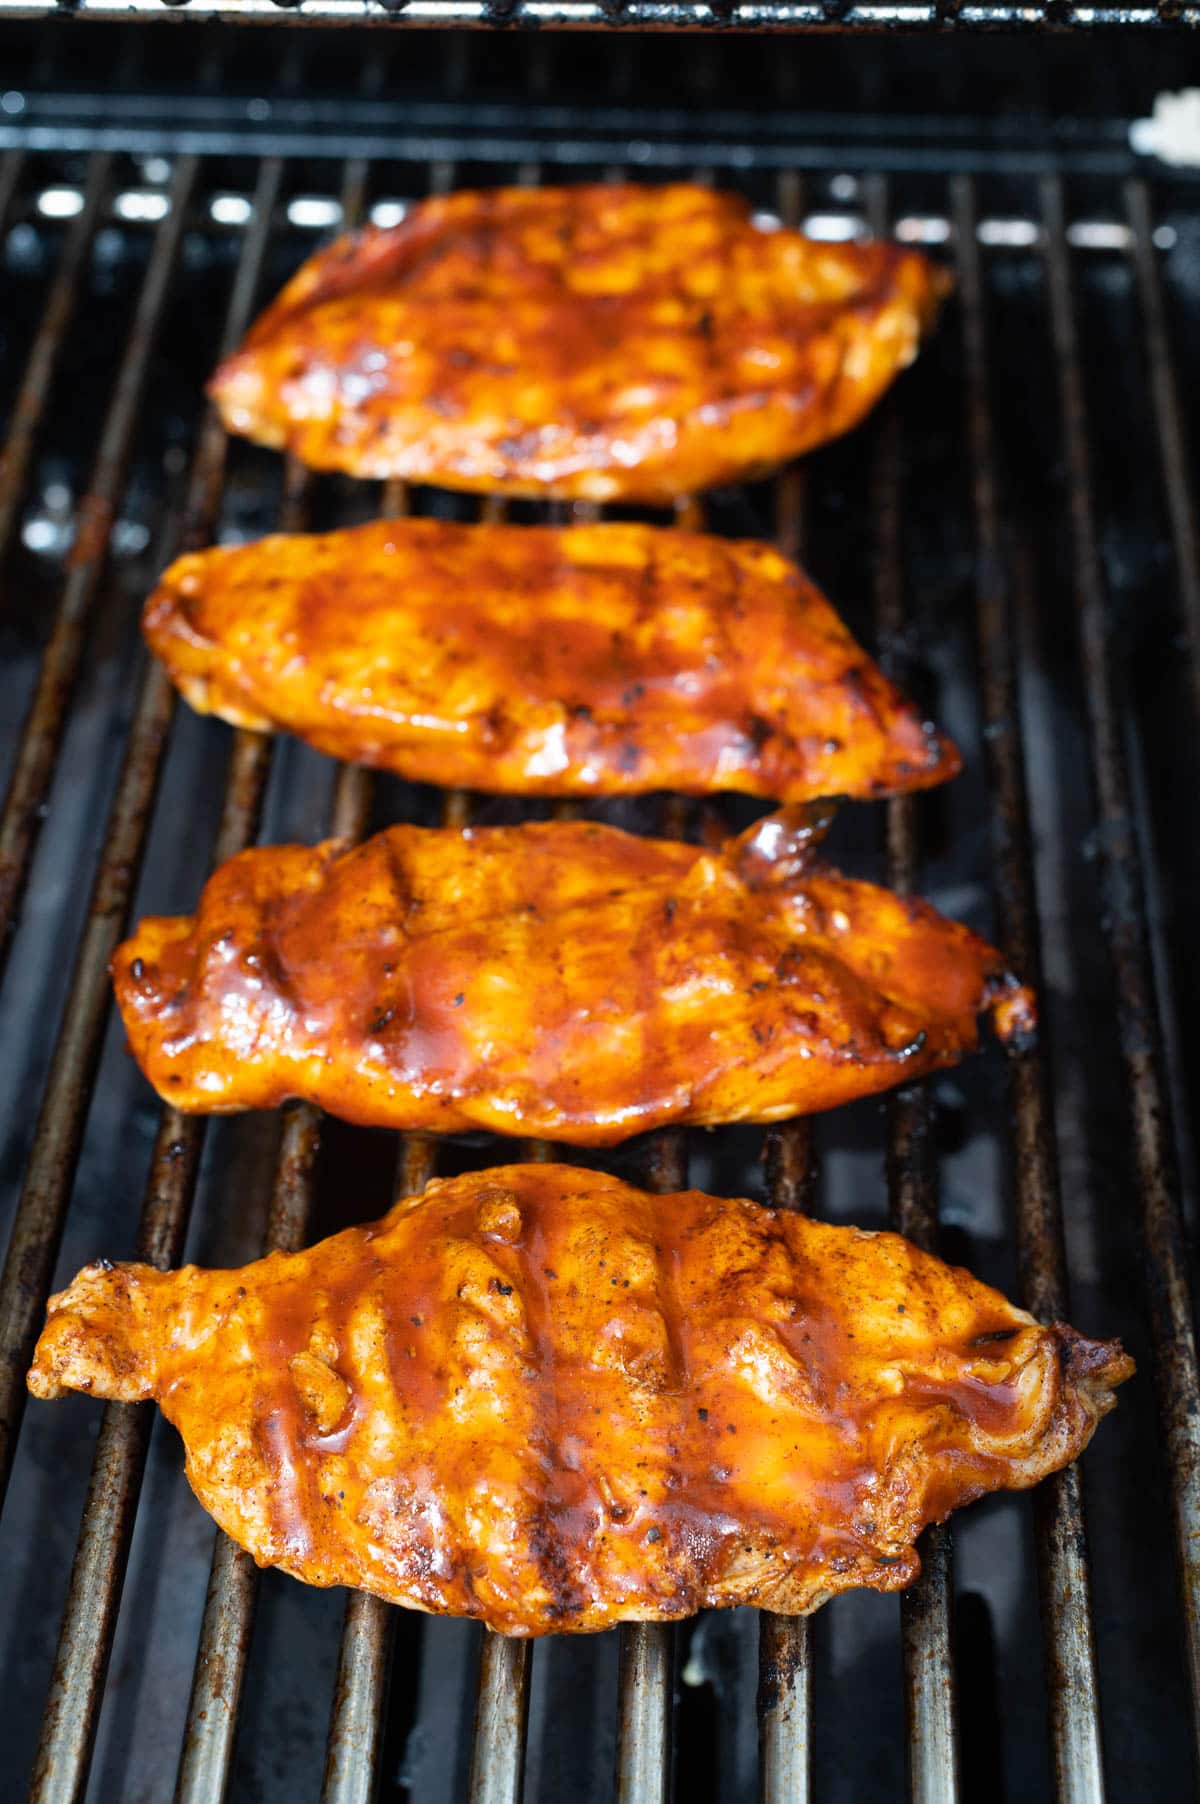 Grilled barbecue chicken breasts on a grill.